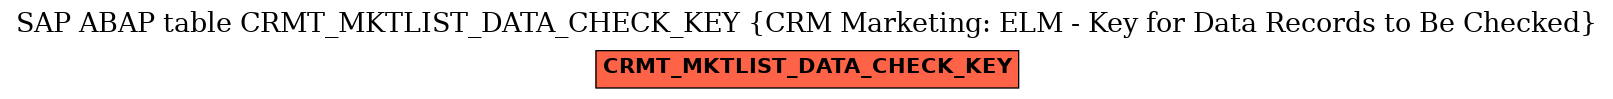 E-R Diagram for table CRMT_MKTLIST_DATA_CHECK_KEY (CRM Marketing: ELM - Key for Data Records to Be Checked)